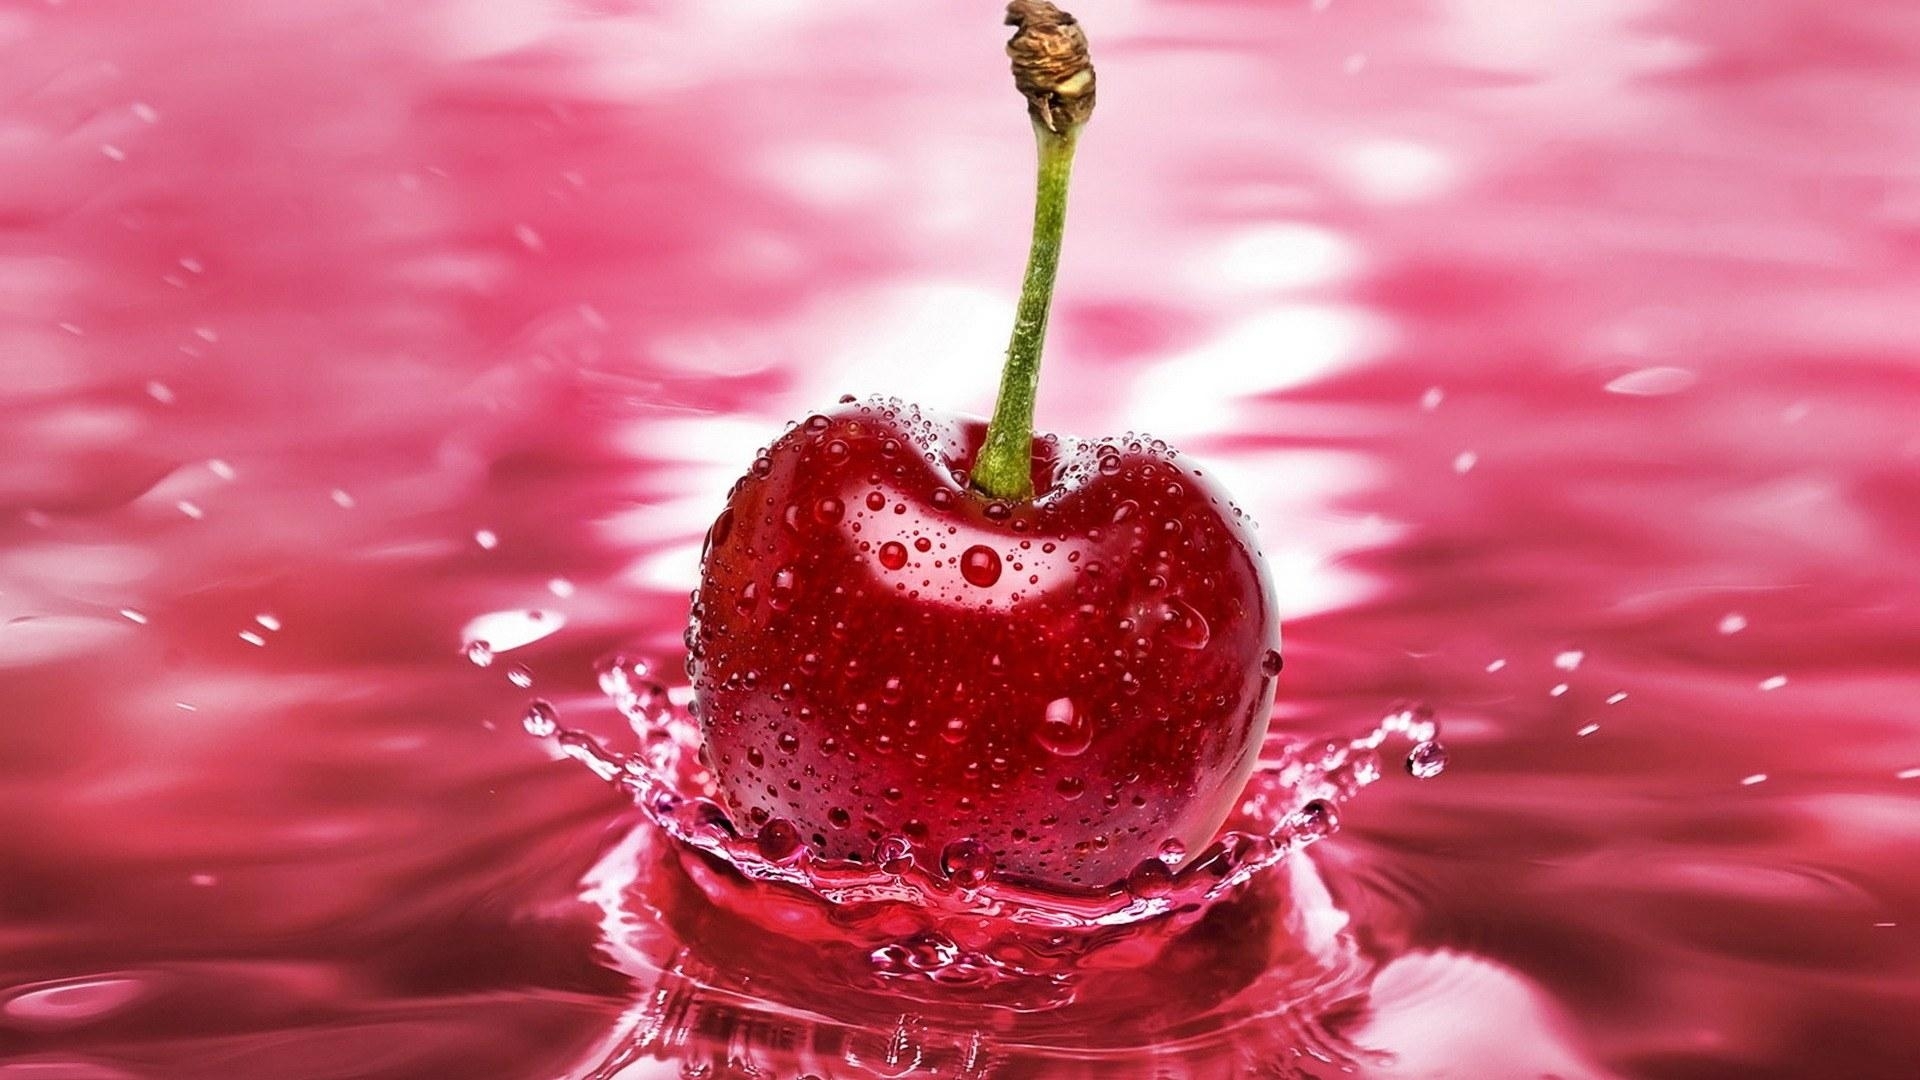 fruits, drops, water, food, cherry, red